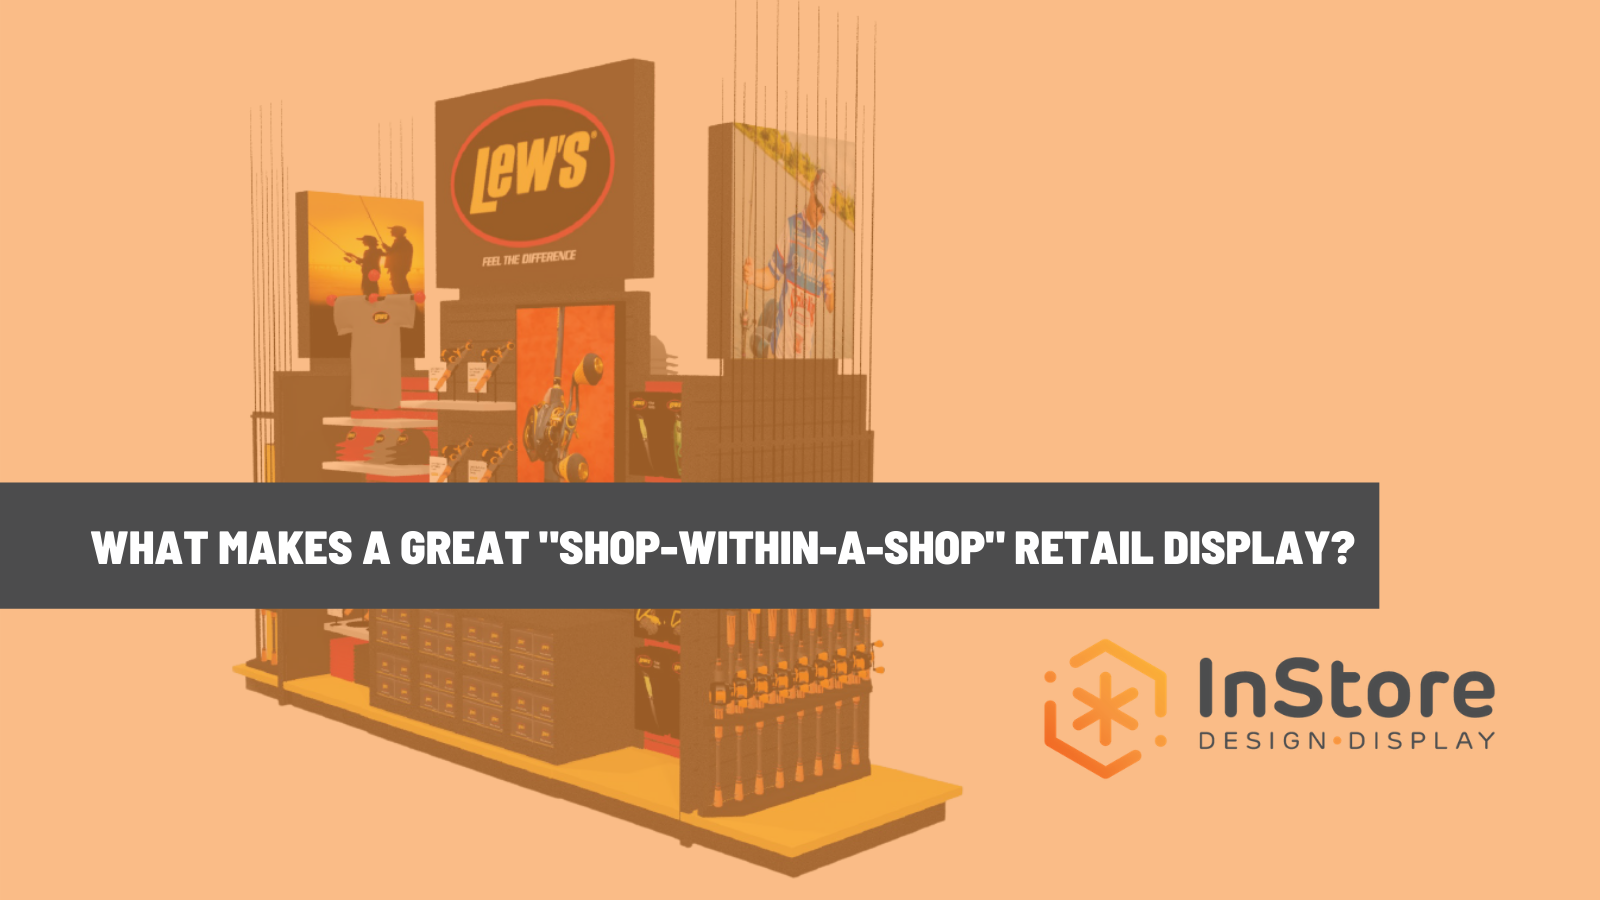 Top 6 Attributes of Store-Within-a-Store Retail Displays